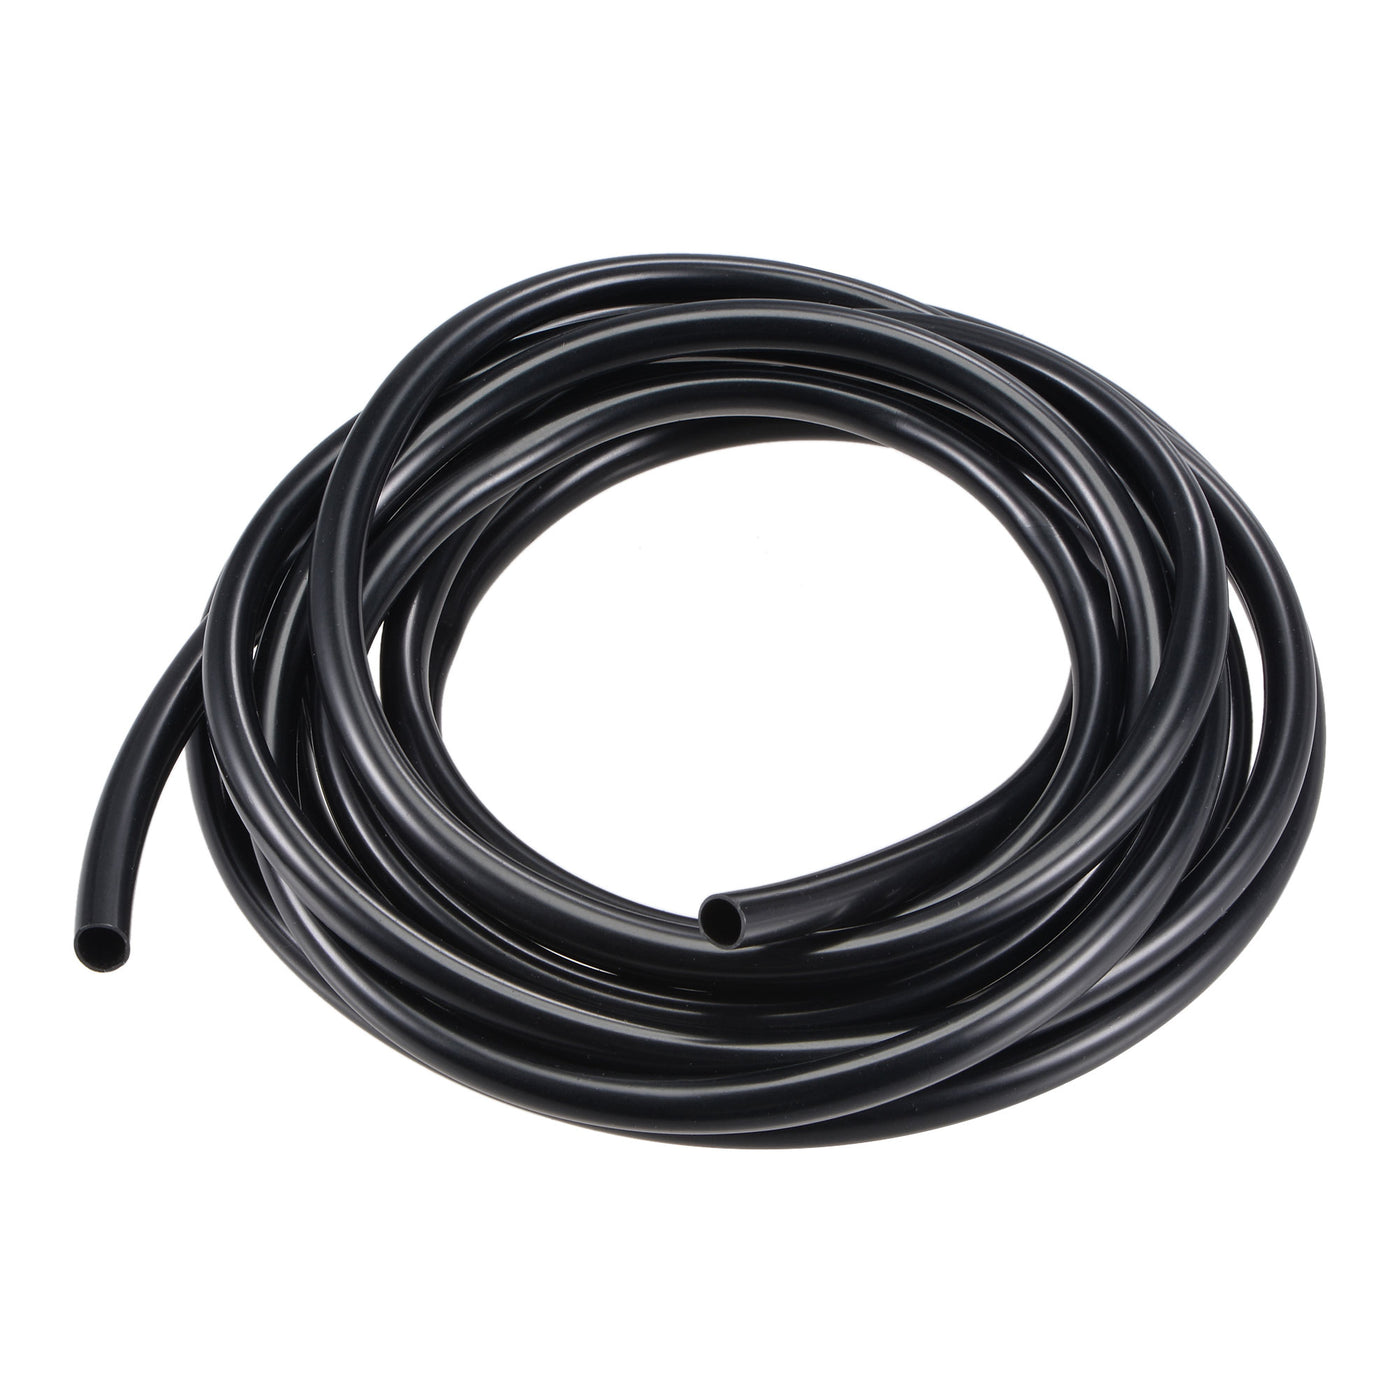 Uxcell Uxcell Black PVC Tube Wire Harness Tubing, 15mm ID 10ft Sleeve for Wire Sheathing Wire Protection